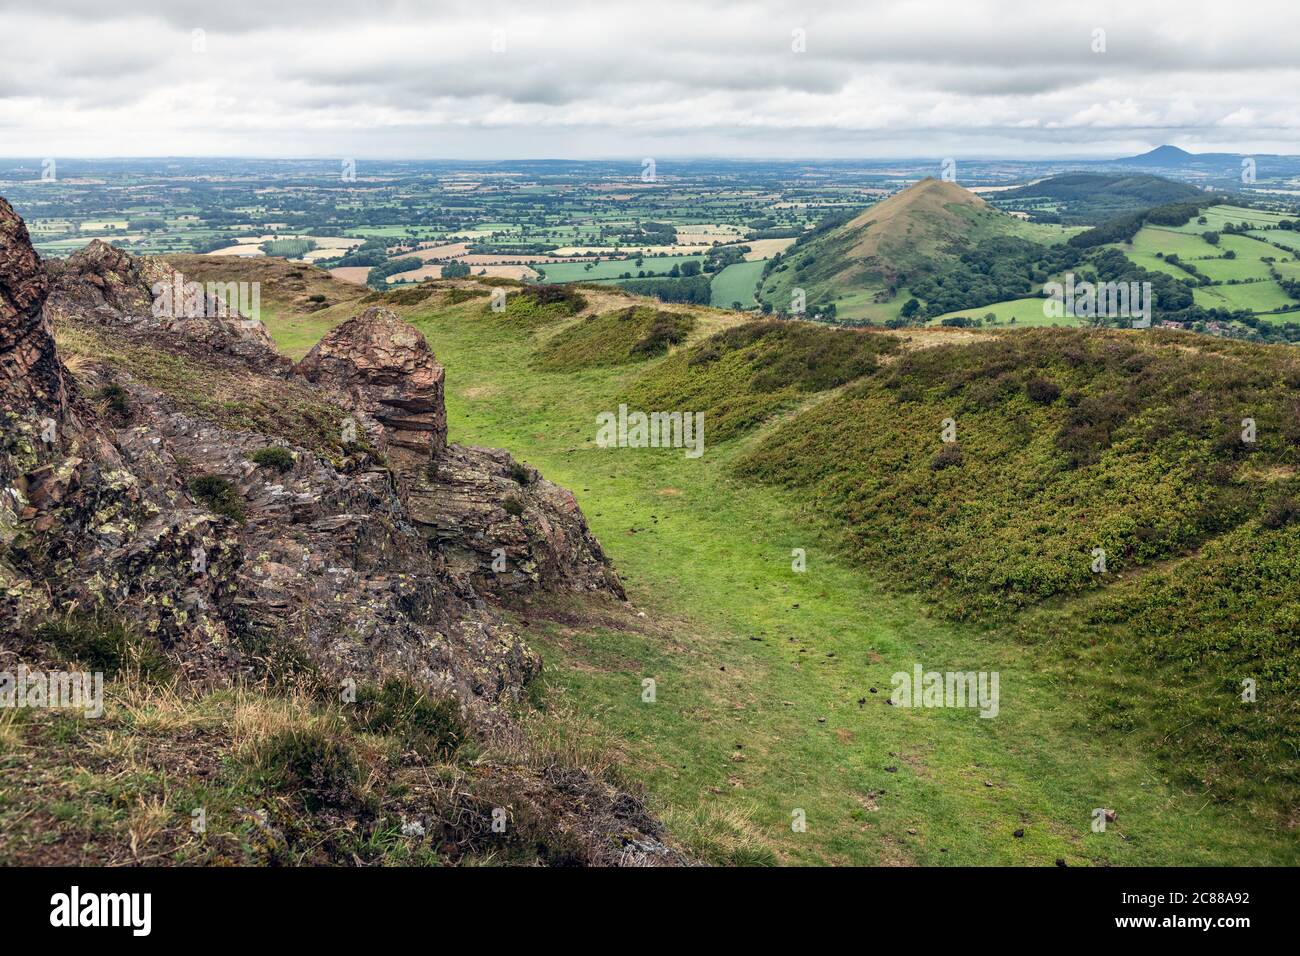 View from the ramparts of the ancient hill fort of Caer Caradoc towards The Lawley and The Wrekin in the distance, near Church Stretton, Shropshire Stock Photo